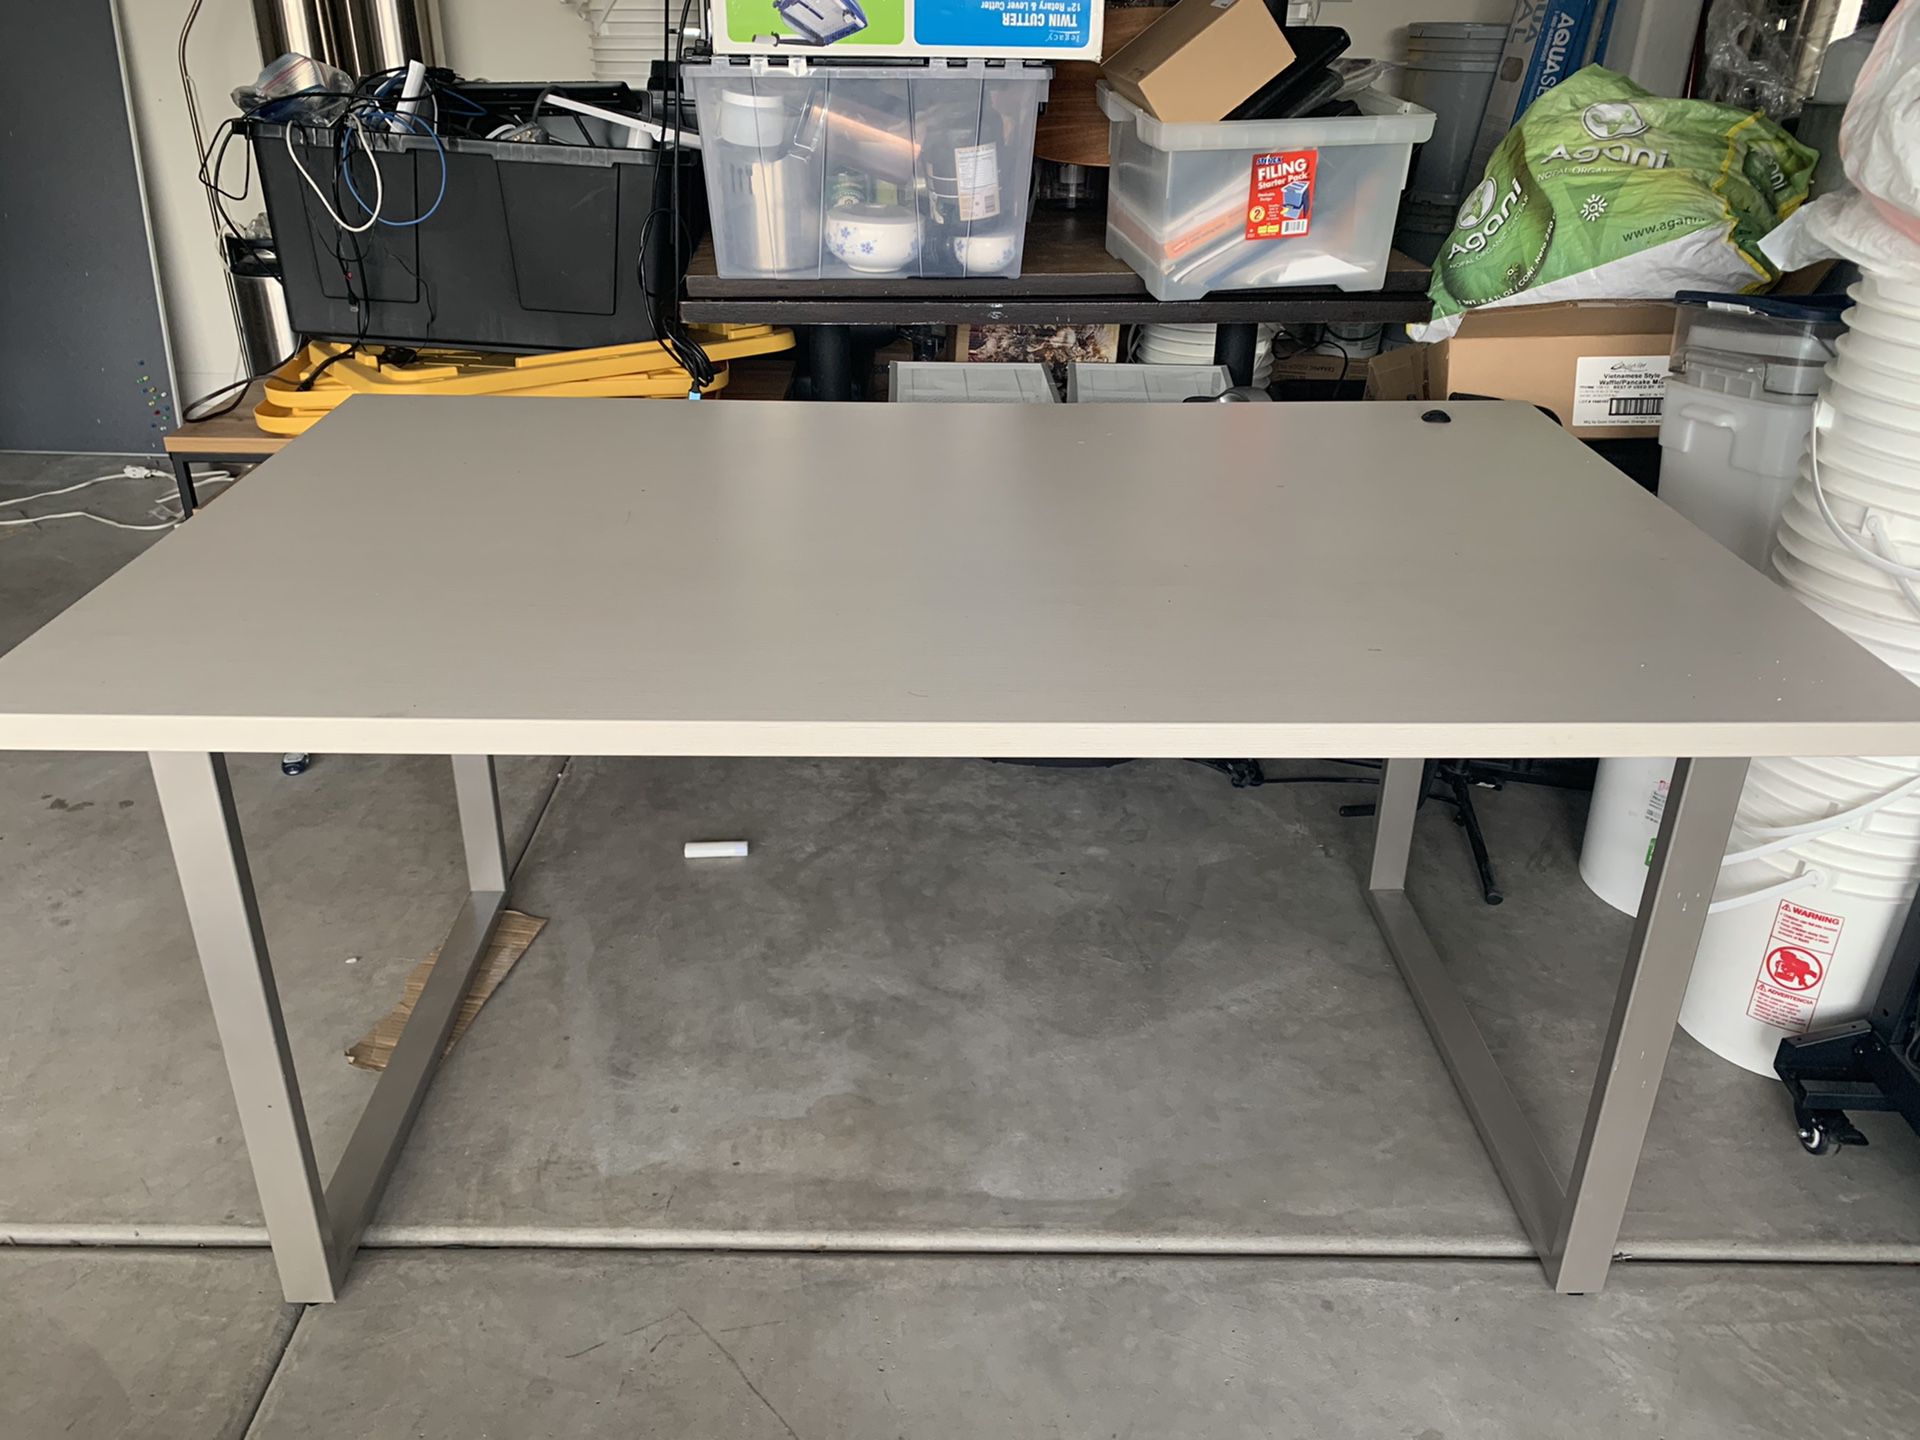 Restaurant style commercial prep table - could be used as dining table